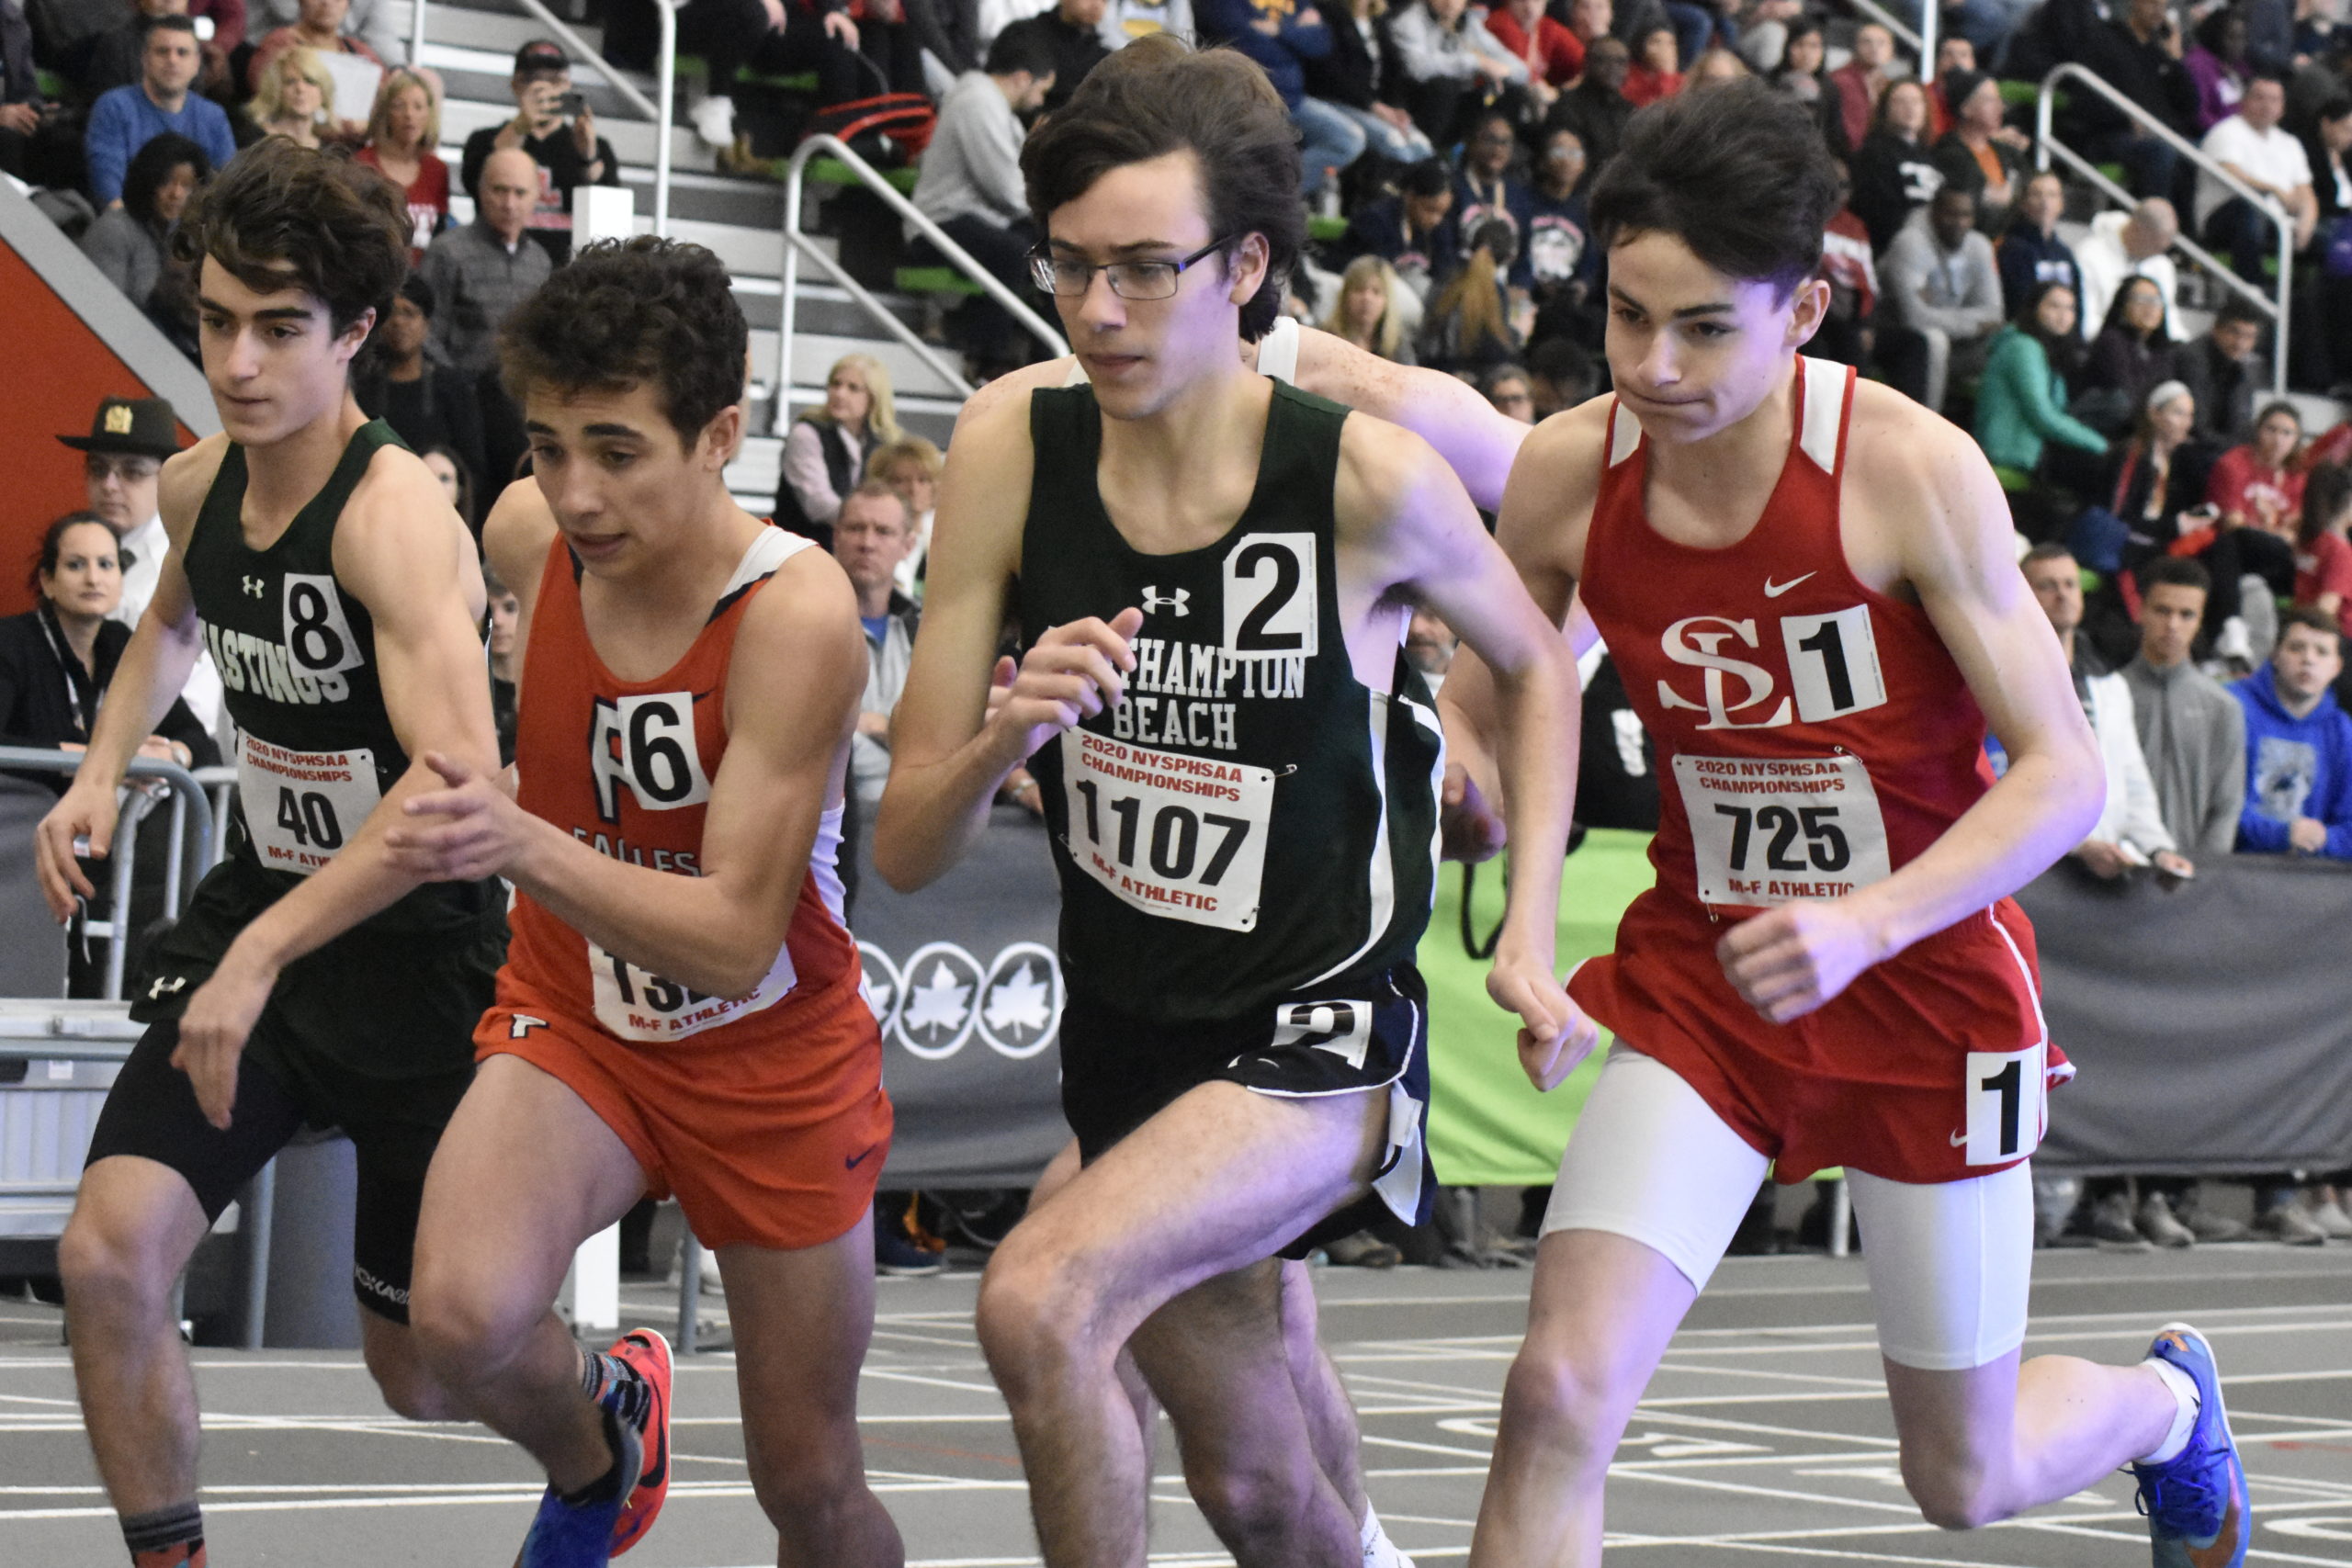 Meigel, Amato Both Earn Bronze Medals At New York State Indoor Track